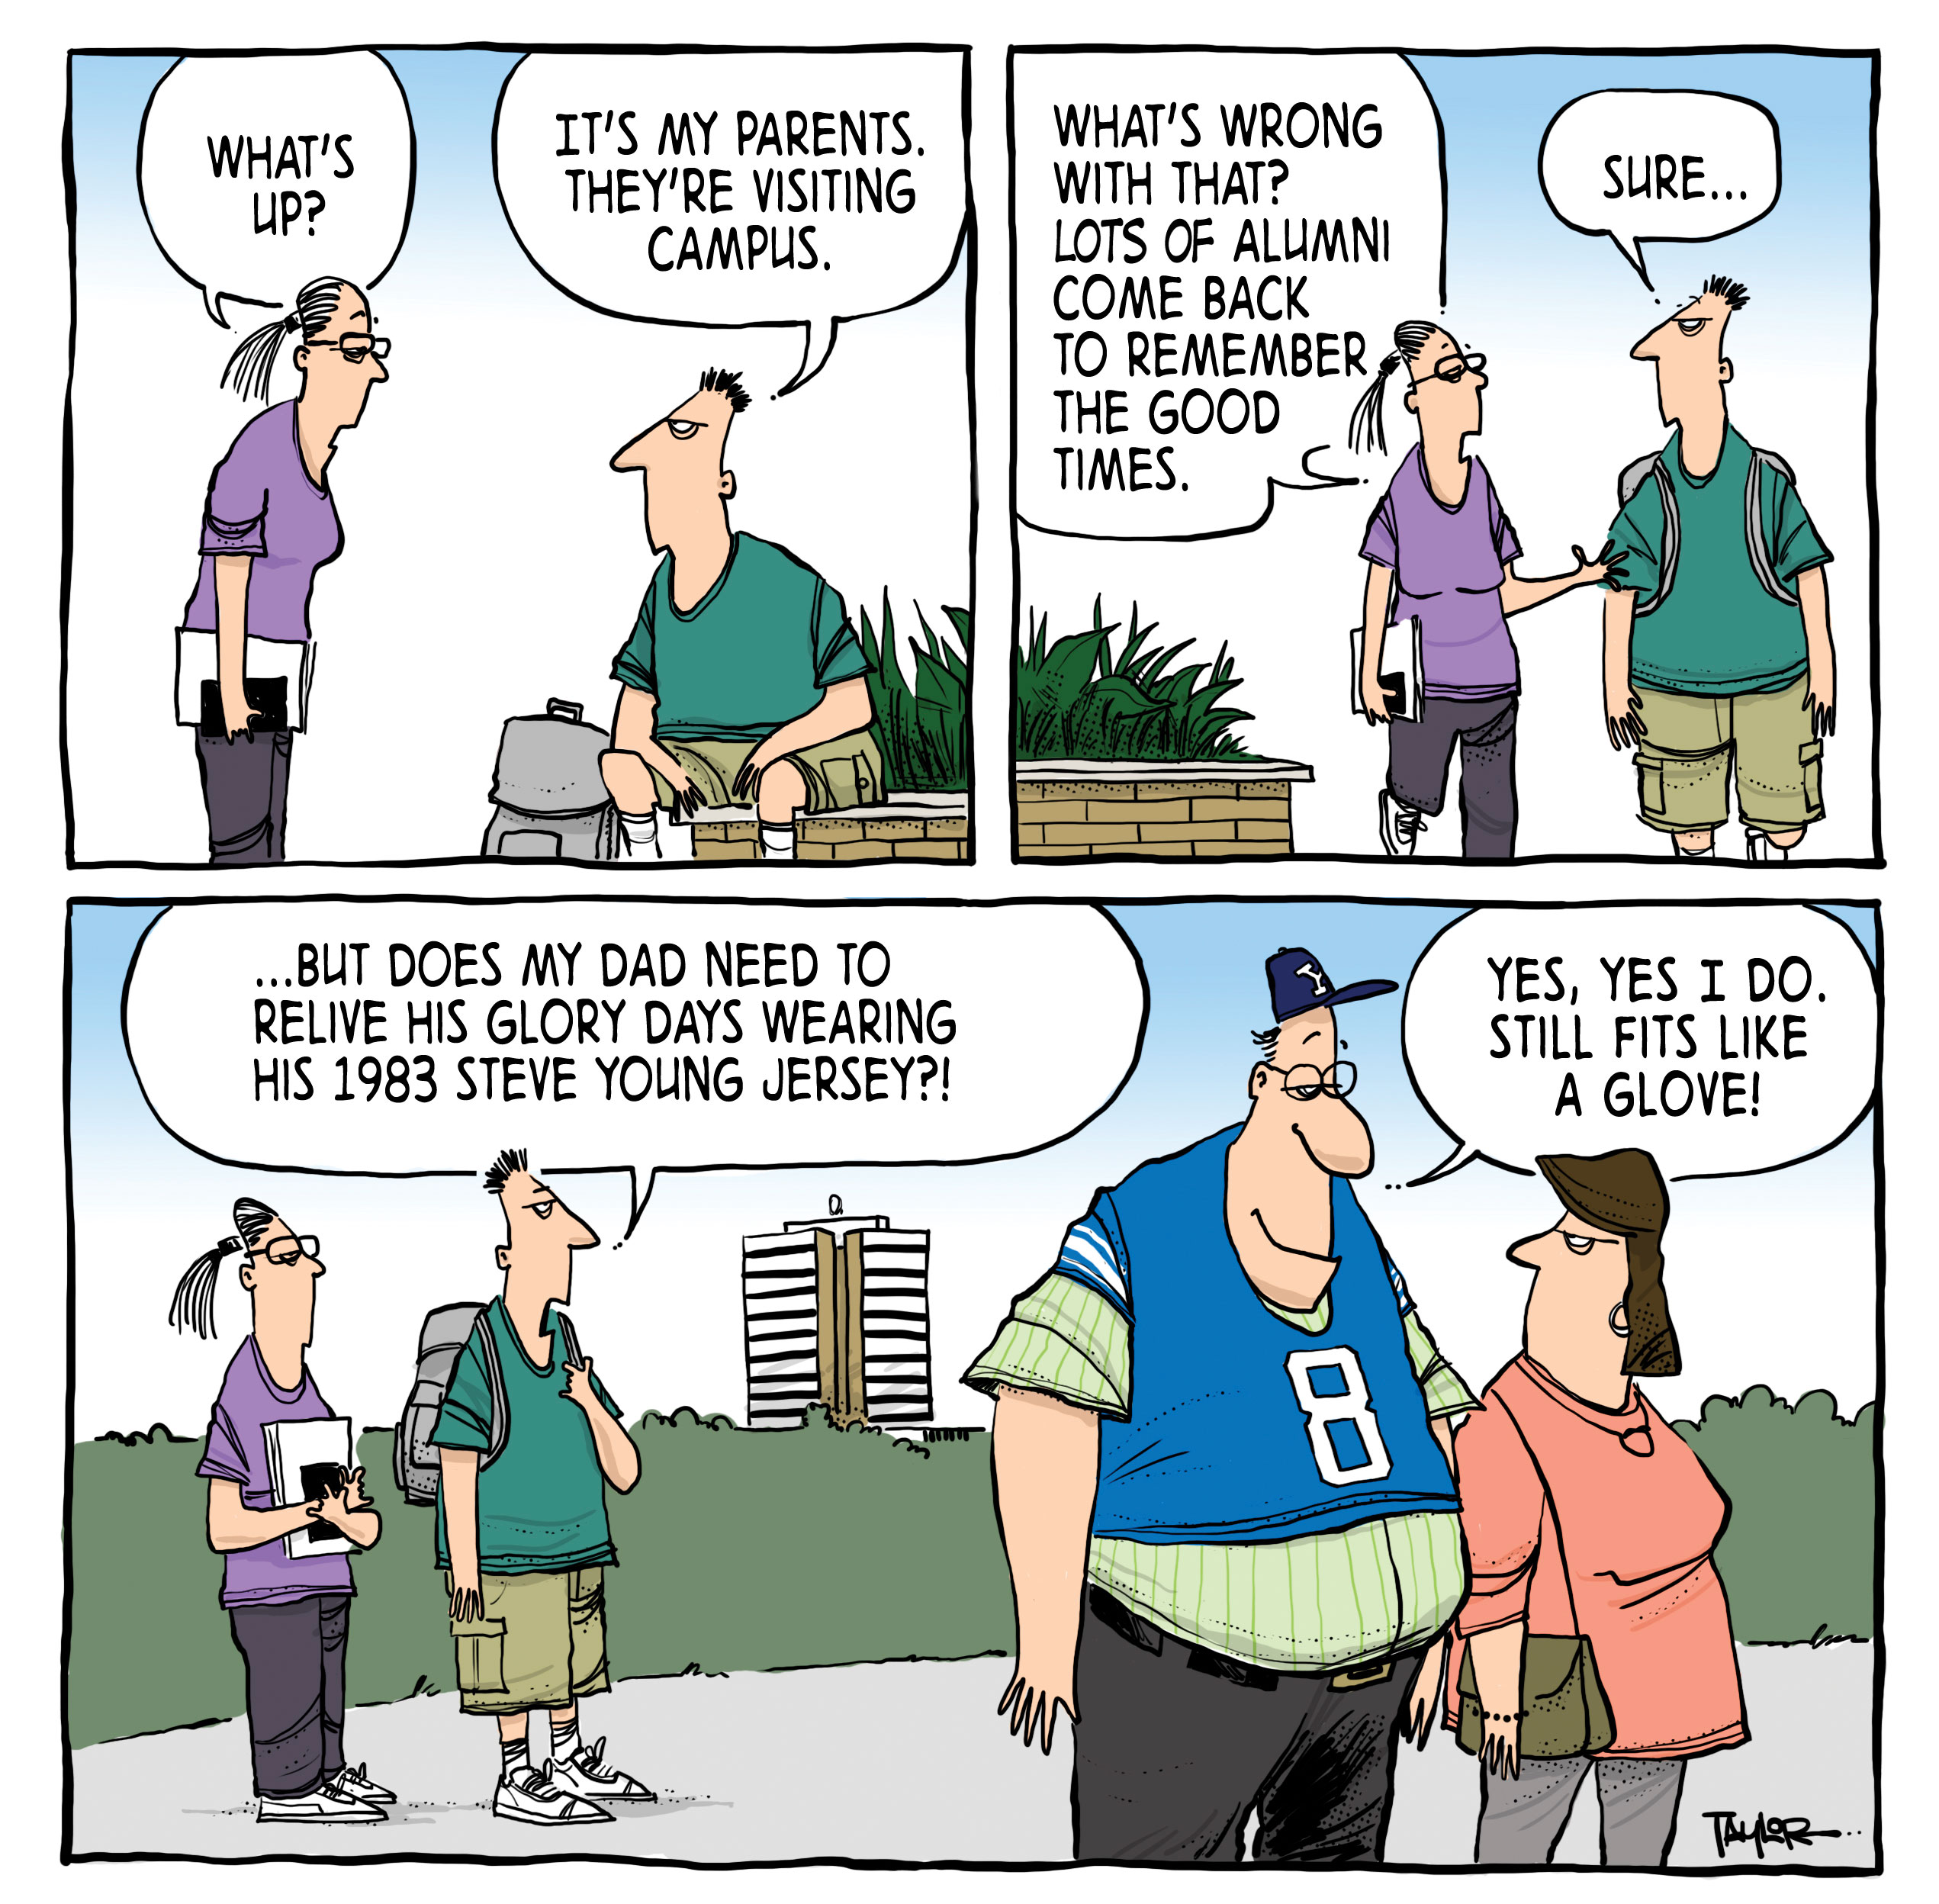 Comic of parent busting out of Steve Young jersey at Parents Weekend